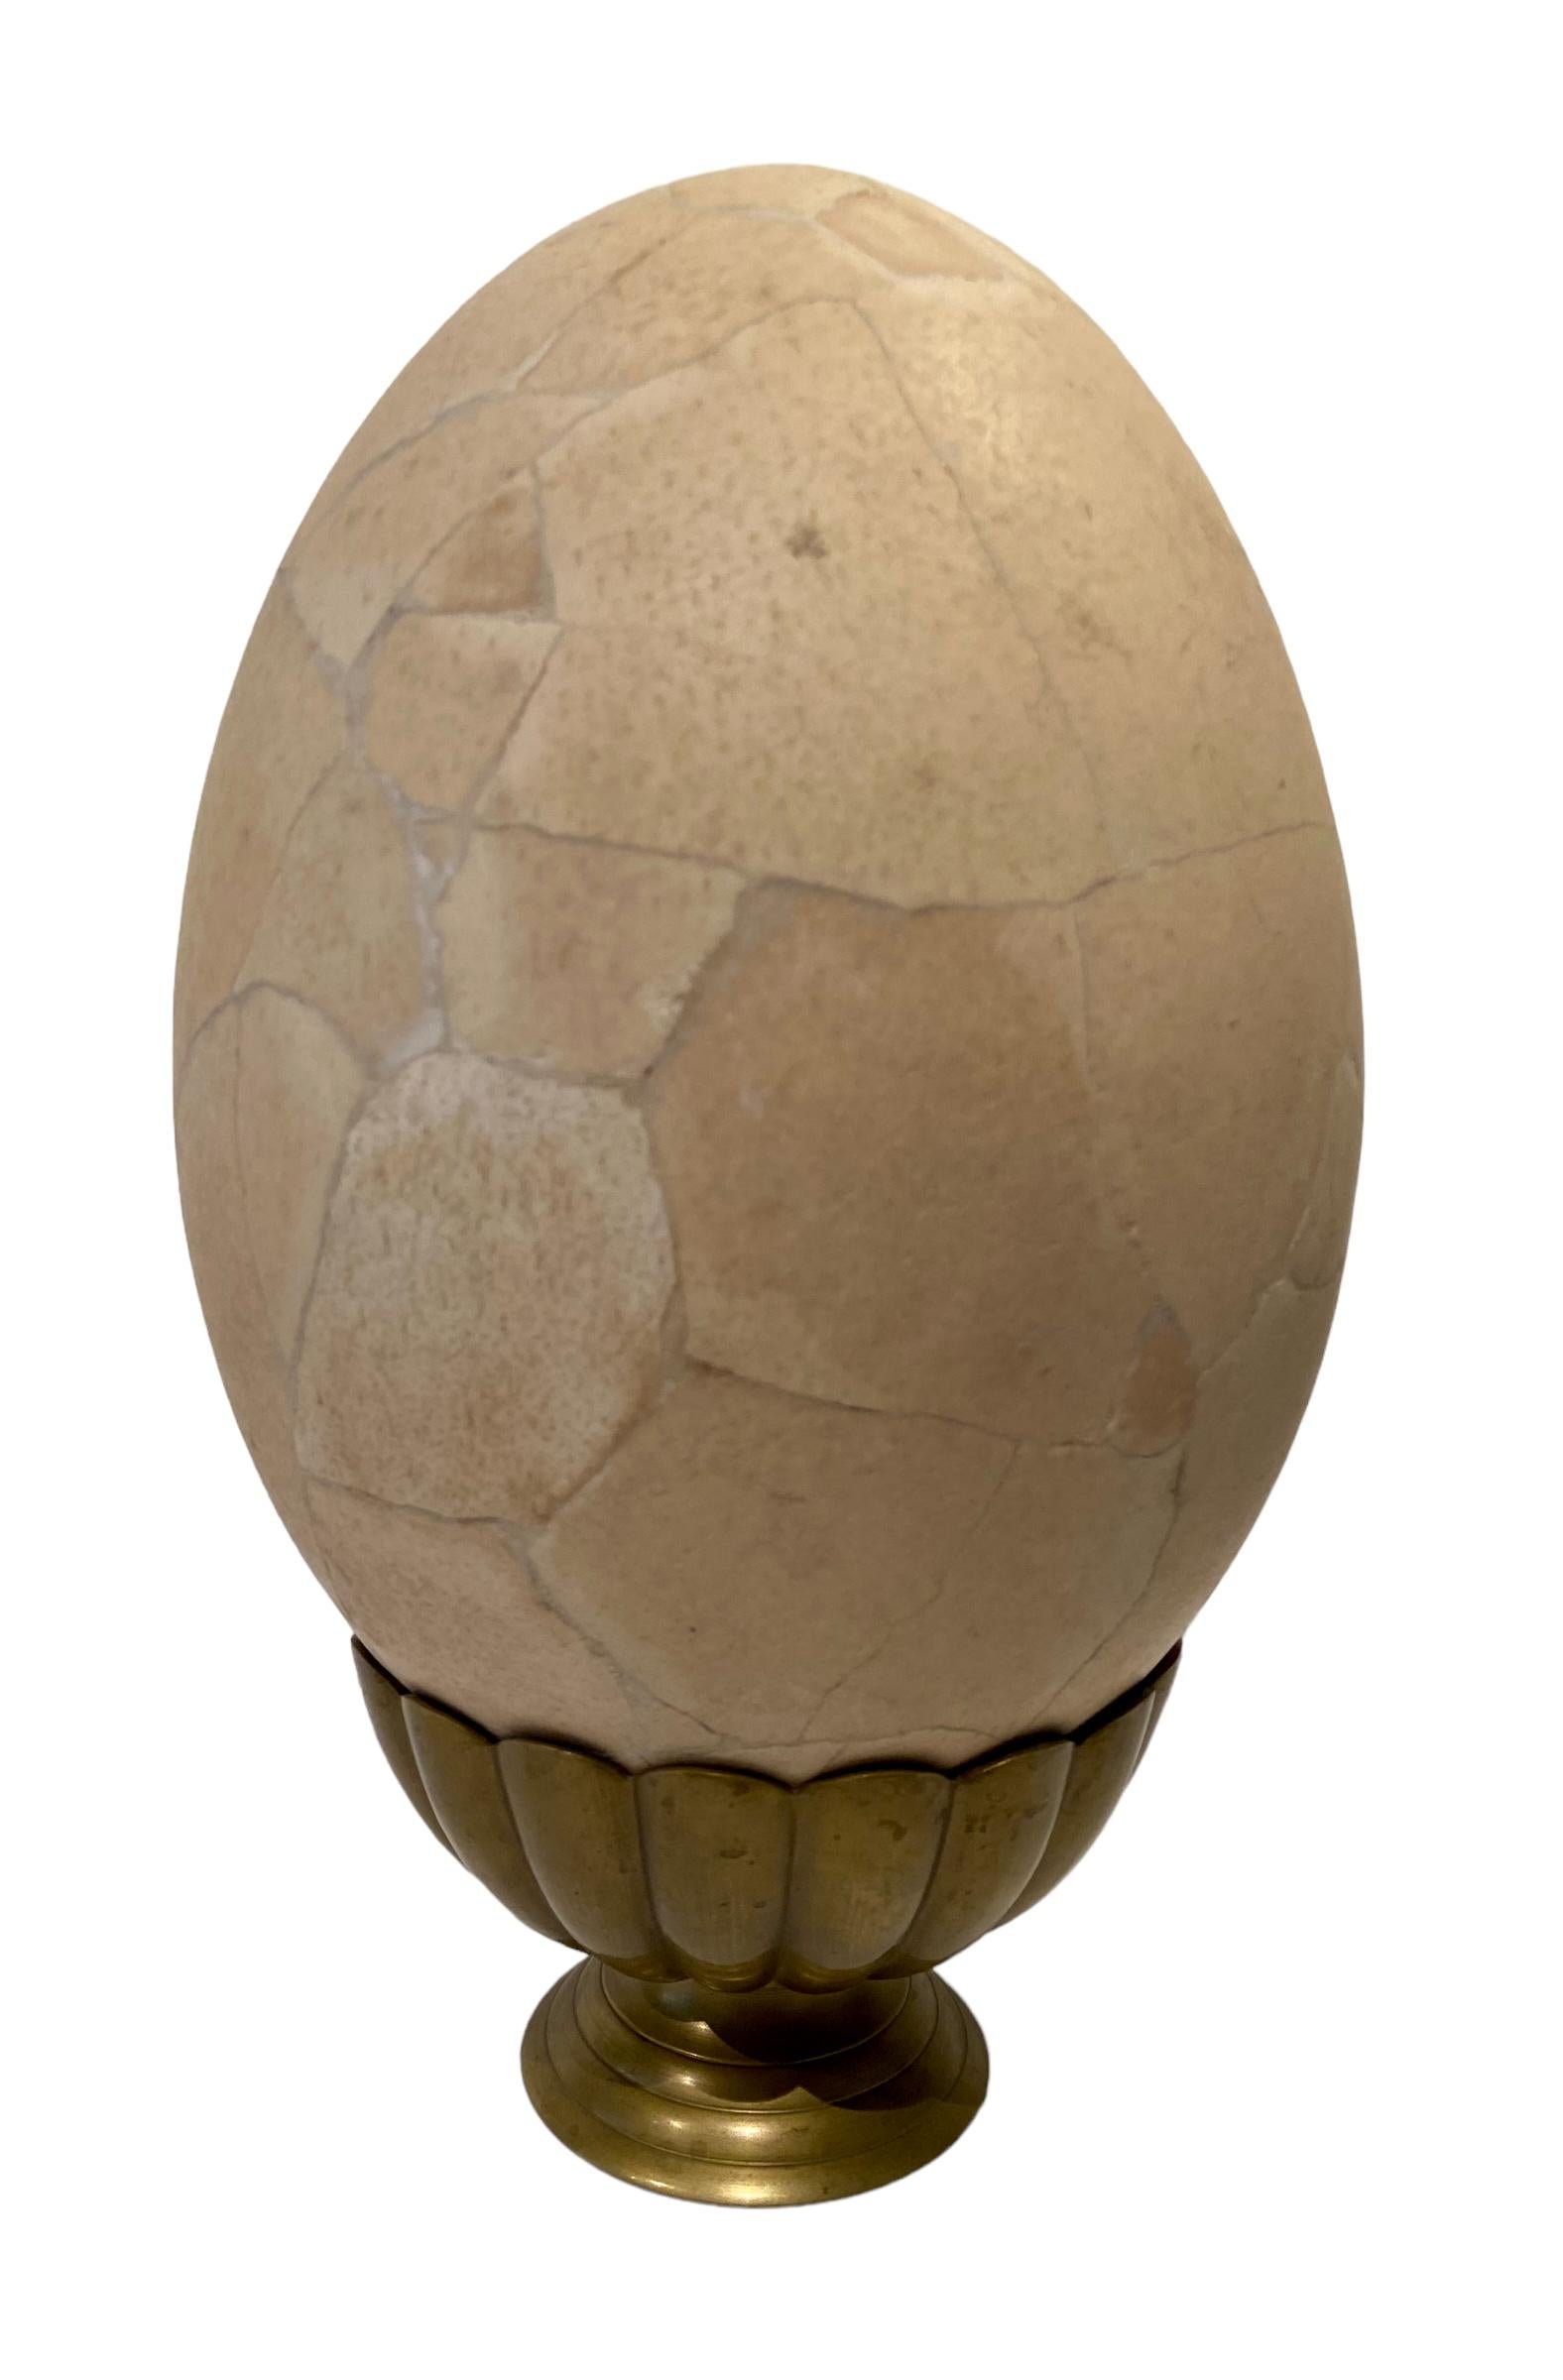 Hand-Crafted Elephant bird egg For Sale